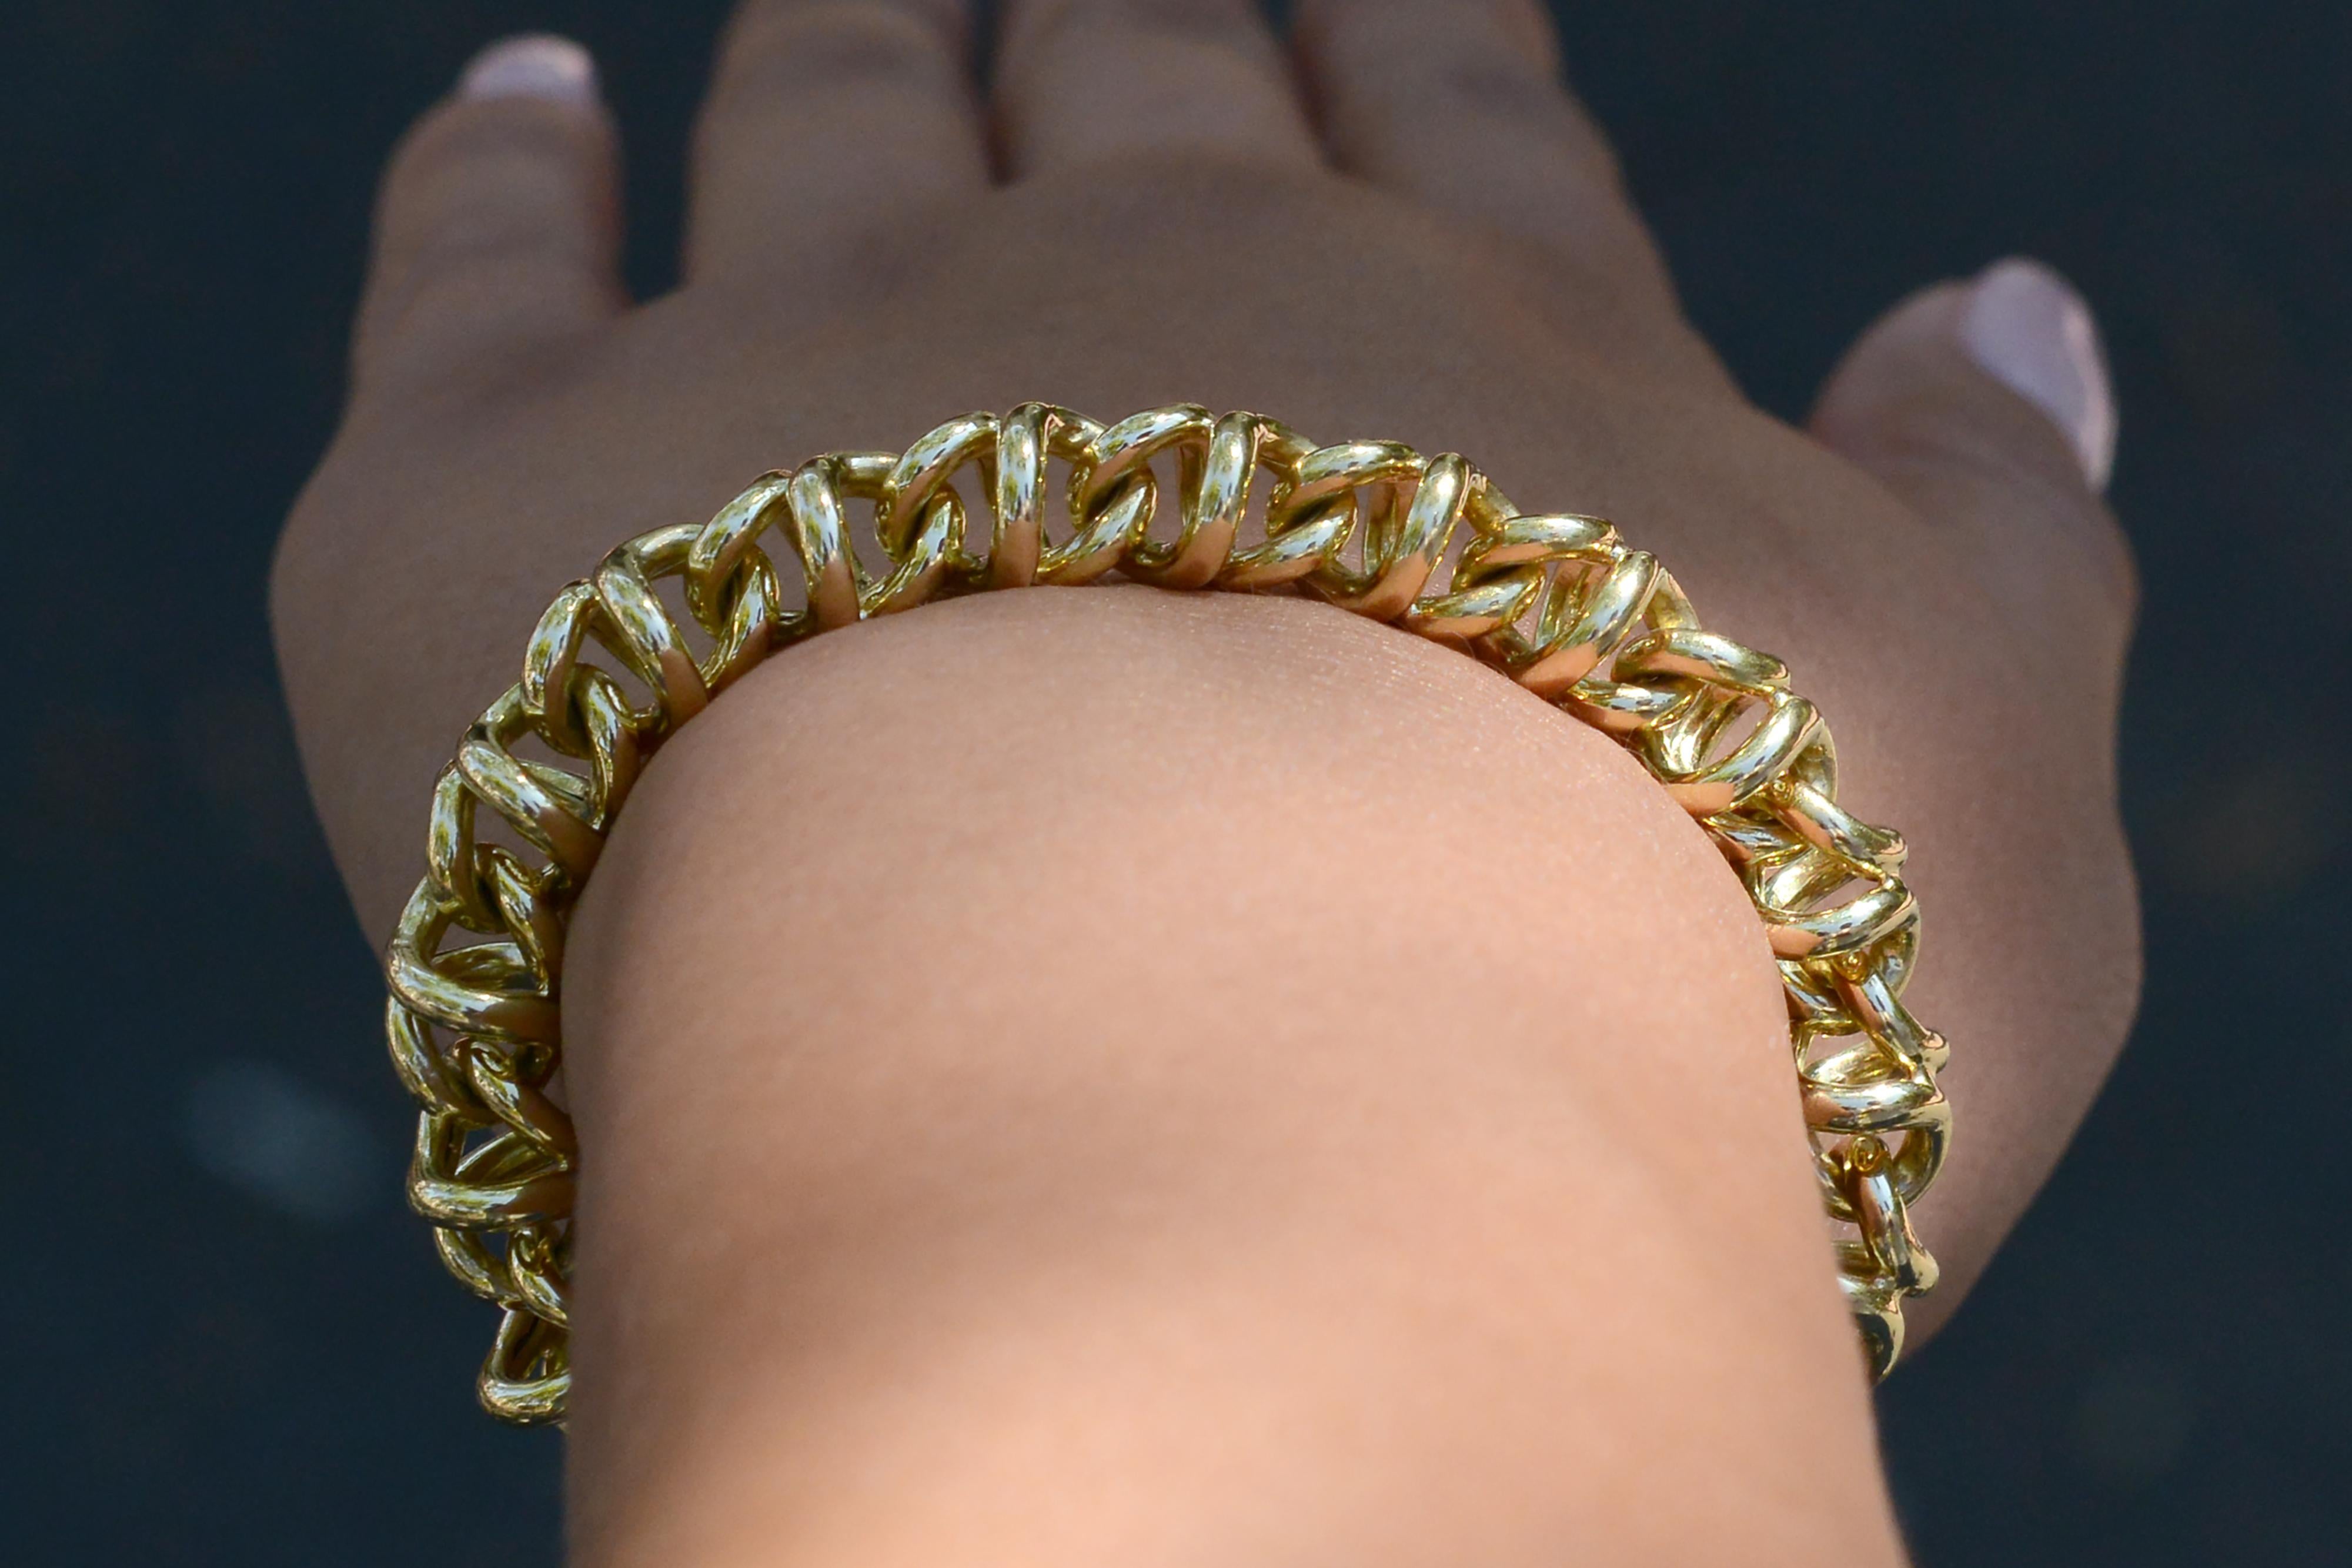 Vintage Tiffany & Co 18K Yellow Gold Woven Link Bracelet In Good Condition For Sale In Santa Barbara, CA